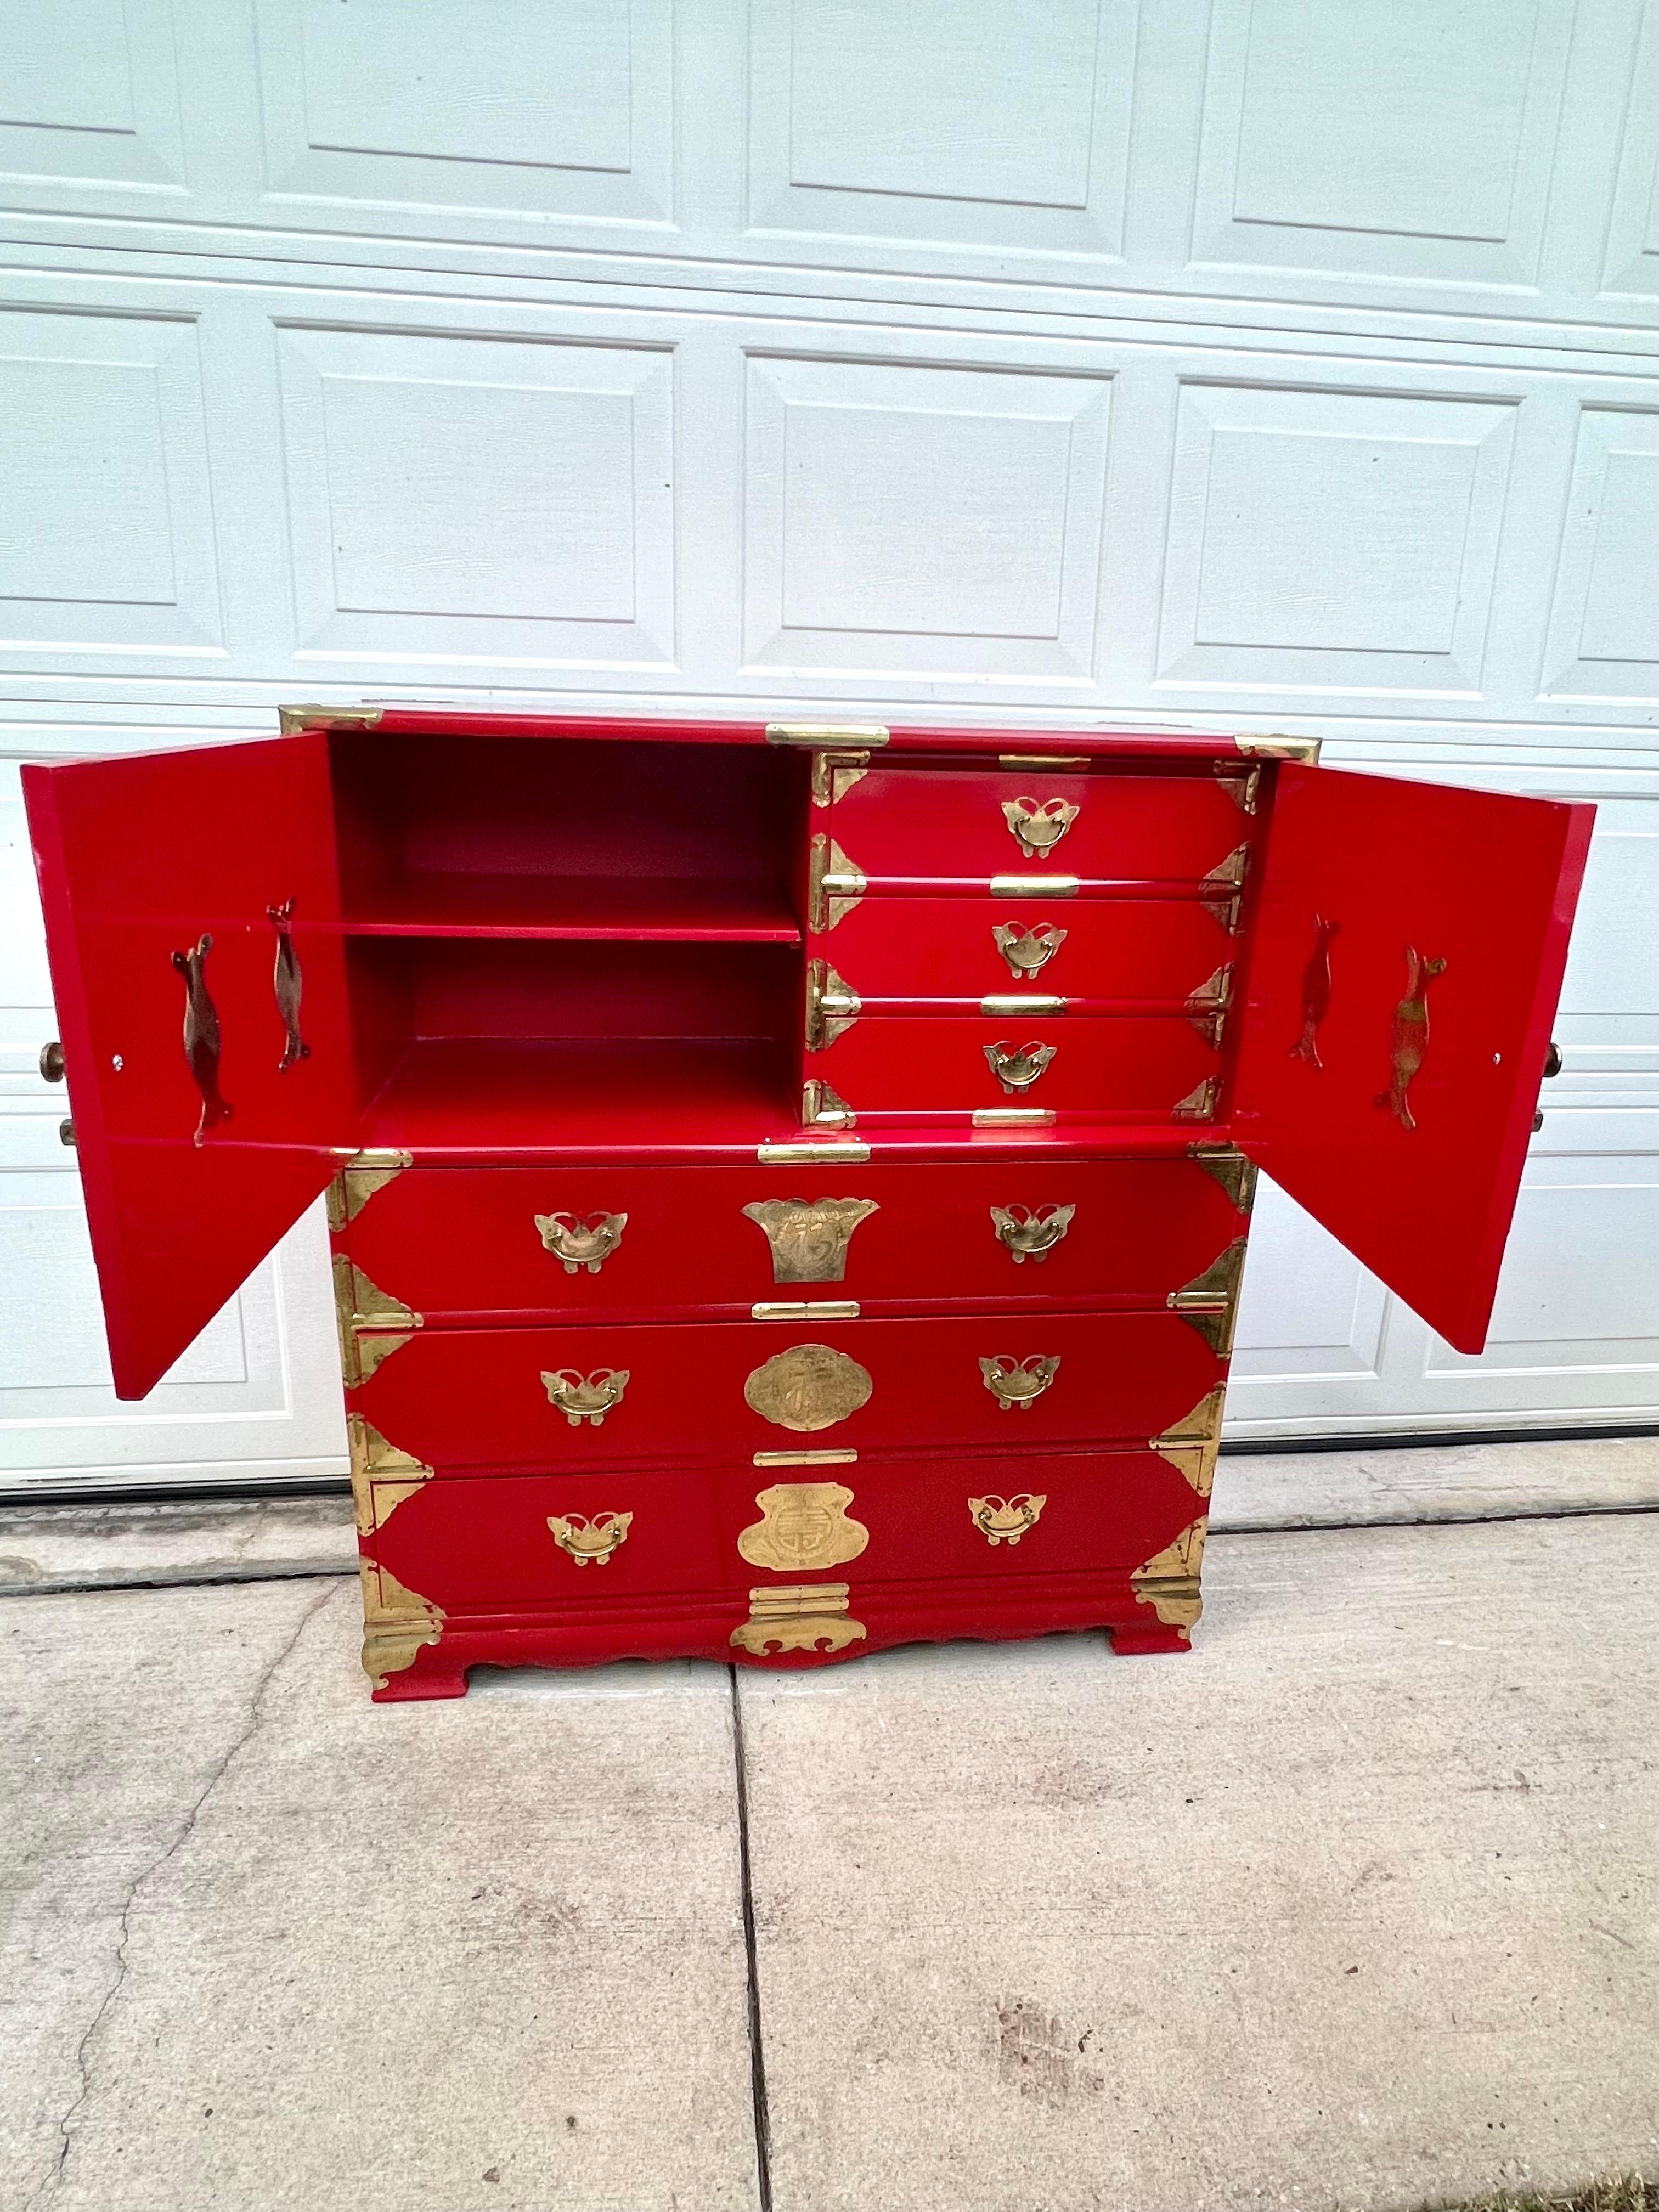 Mid-20th century brass mounted red lacquered sideboard / tansu campaign chest with profuse engraved brass butterfly and medallion mounts, two blind doors revealing 3 fitted interior upper drawers, and three lower long drawers. Does not have